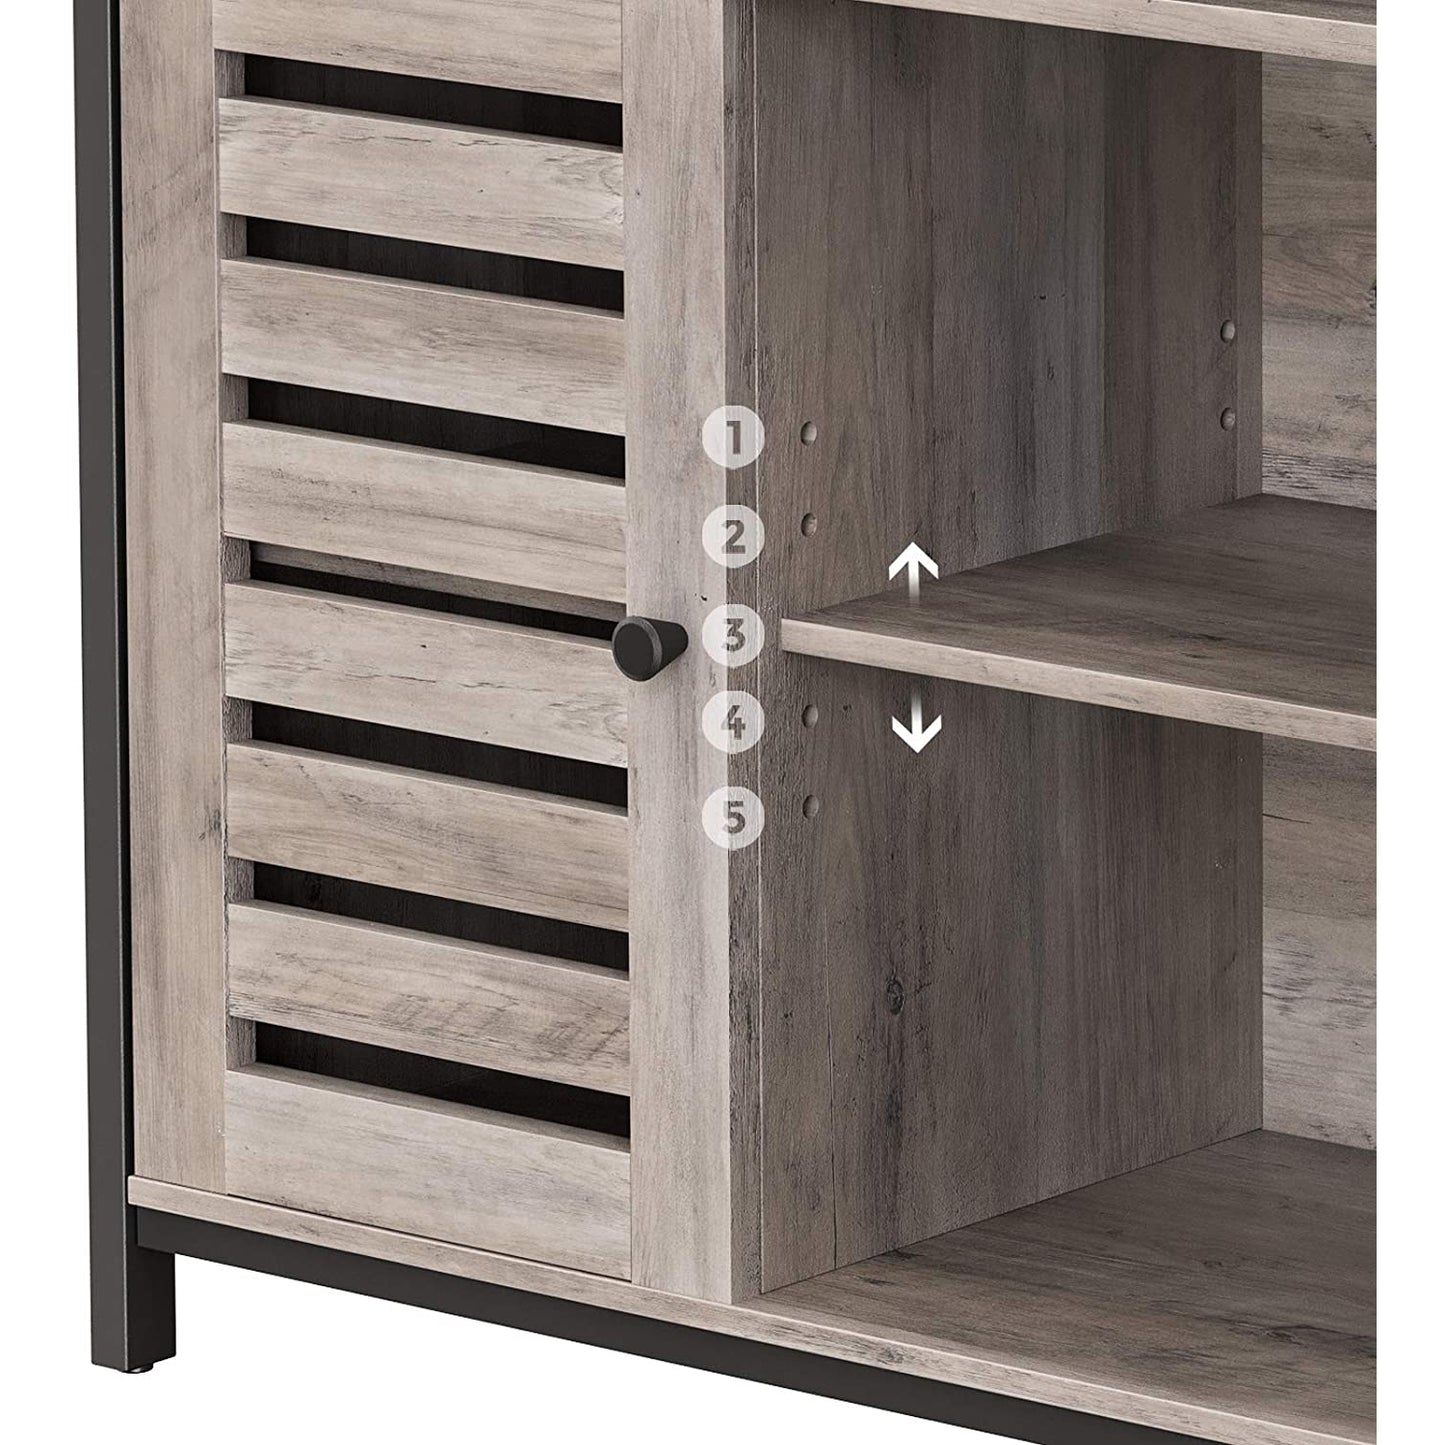 Nancy's Plymouth Industrial Side Cabinet - Chest of Drawers - Storage Cabinet - Dresser - Cabinet with 4 Shelves and 2 Doors - 100 x 35 x 80 cm